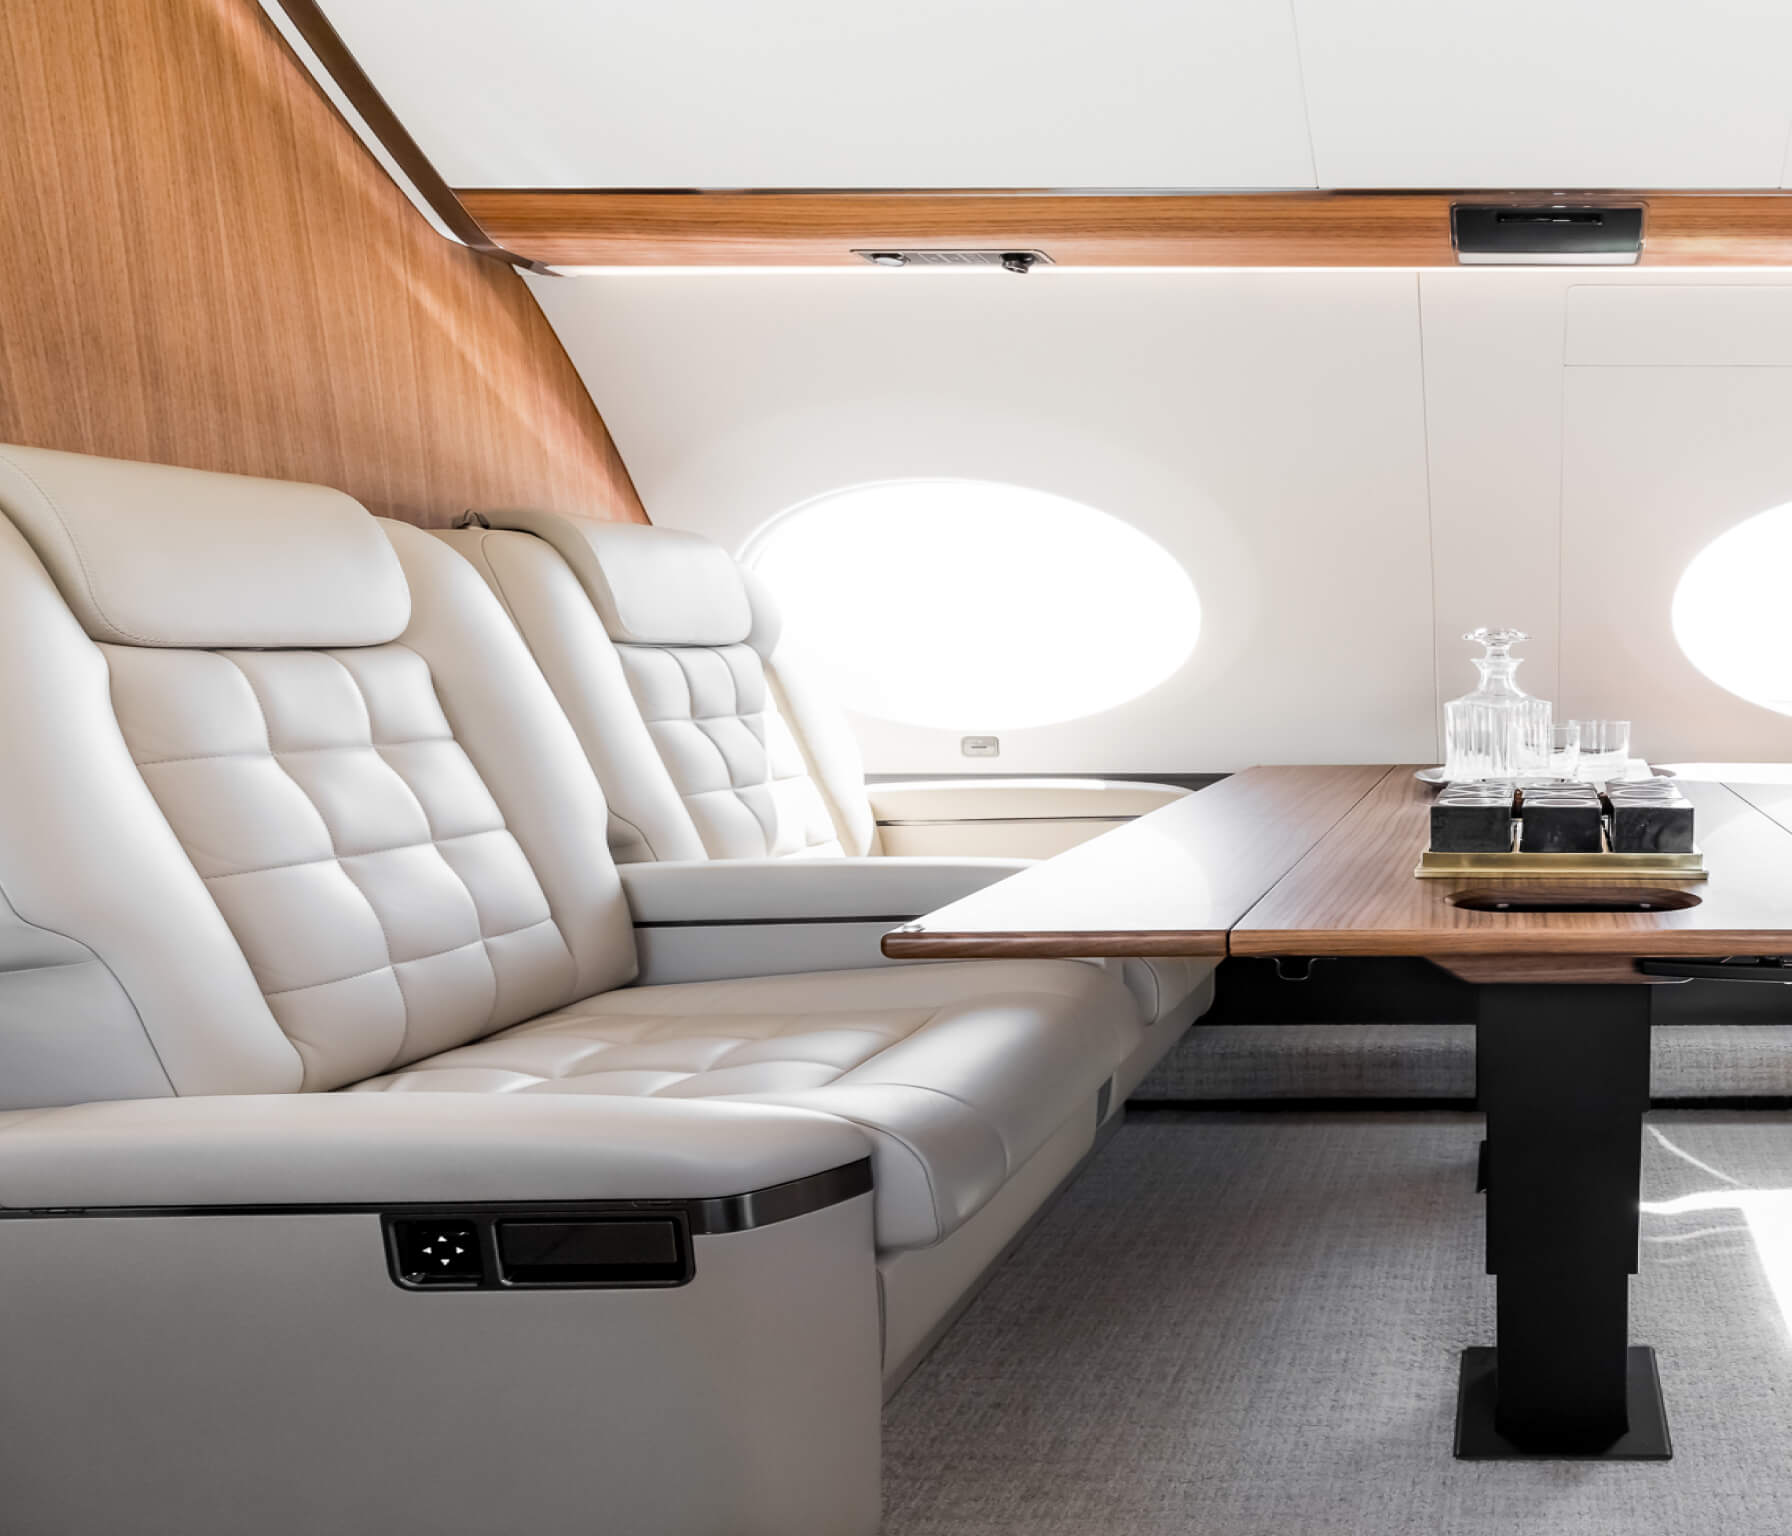 Interior of a private jet showing 4 empty seats